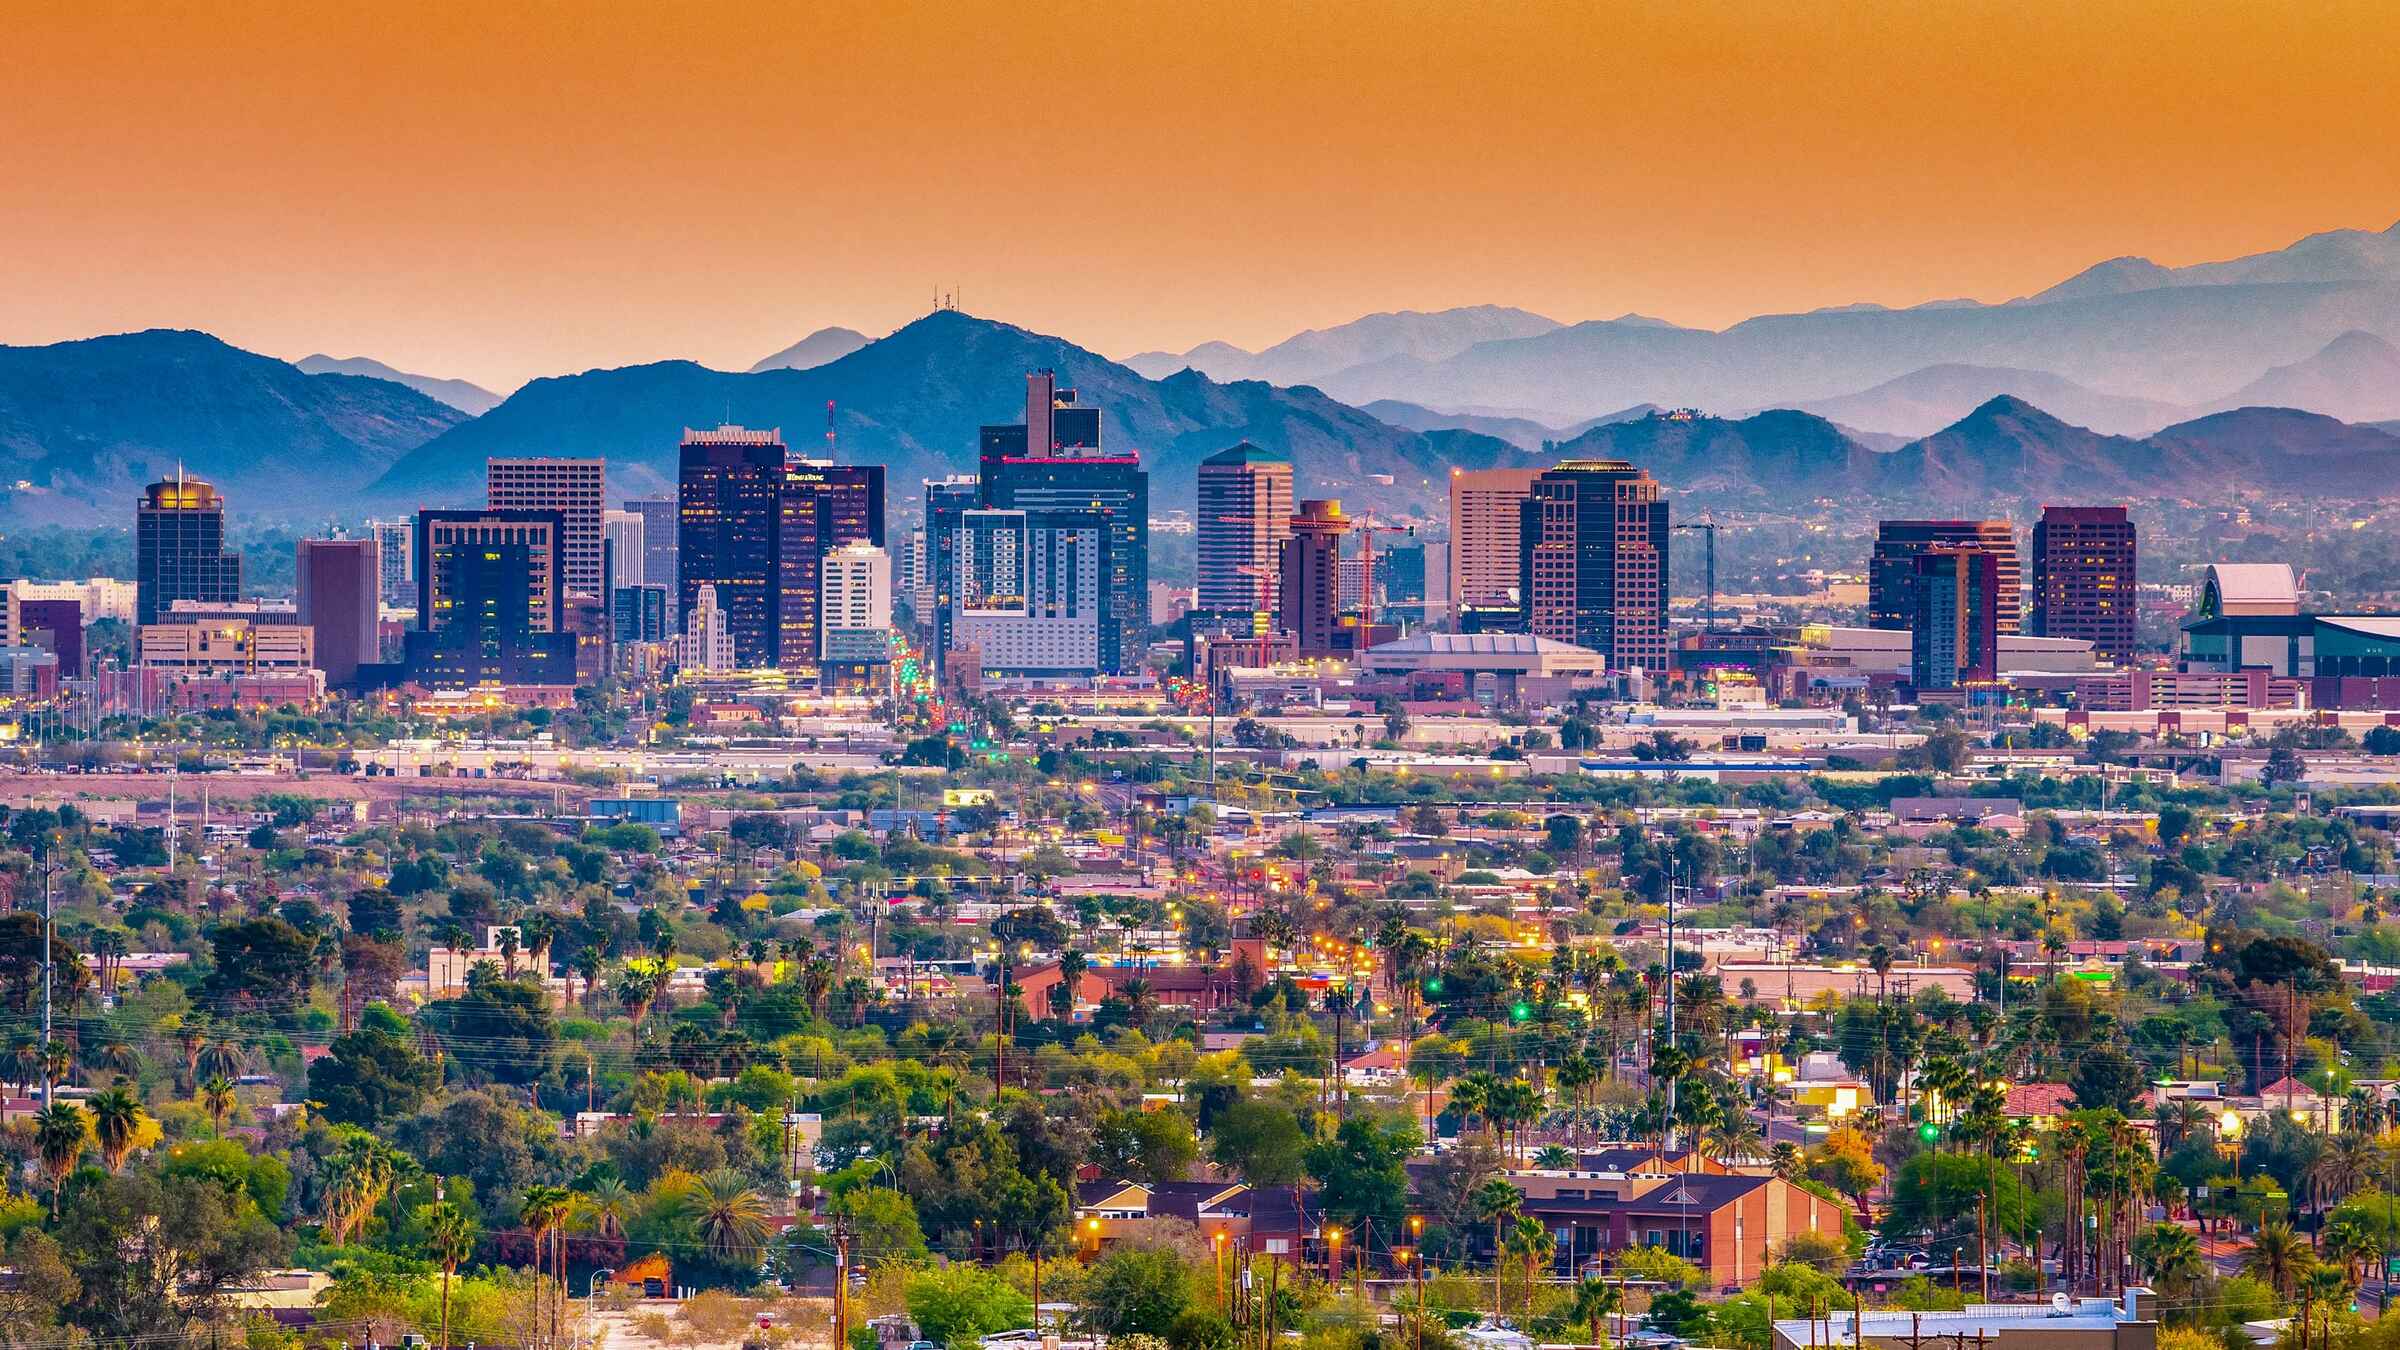 Phoenix ranks fifth best city for small business wage growth